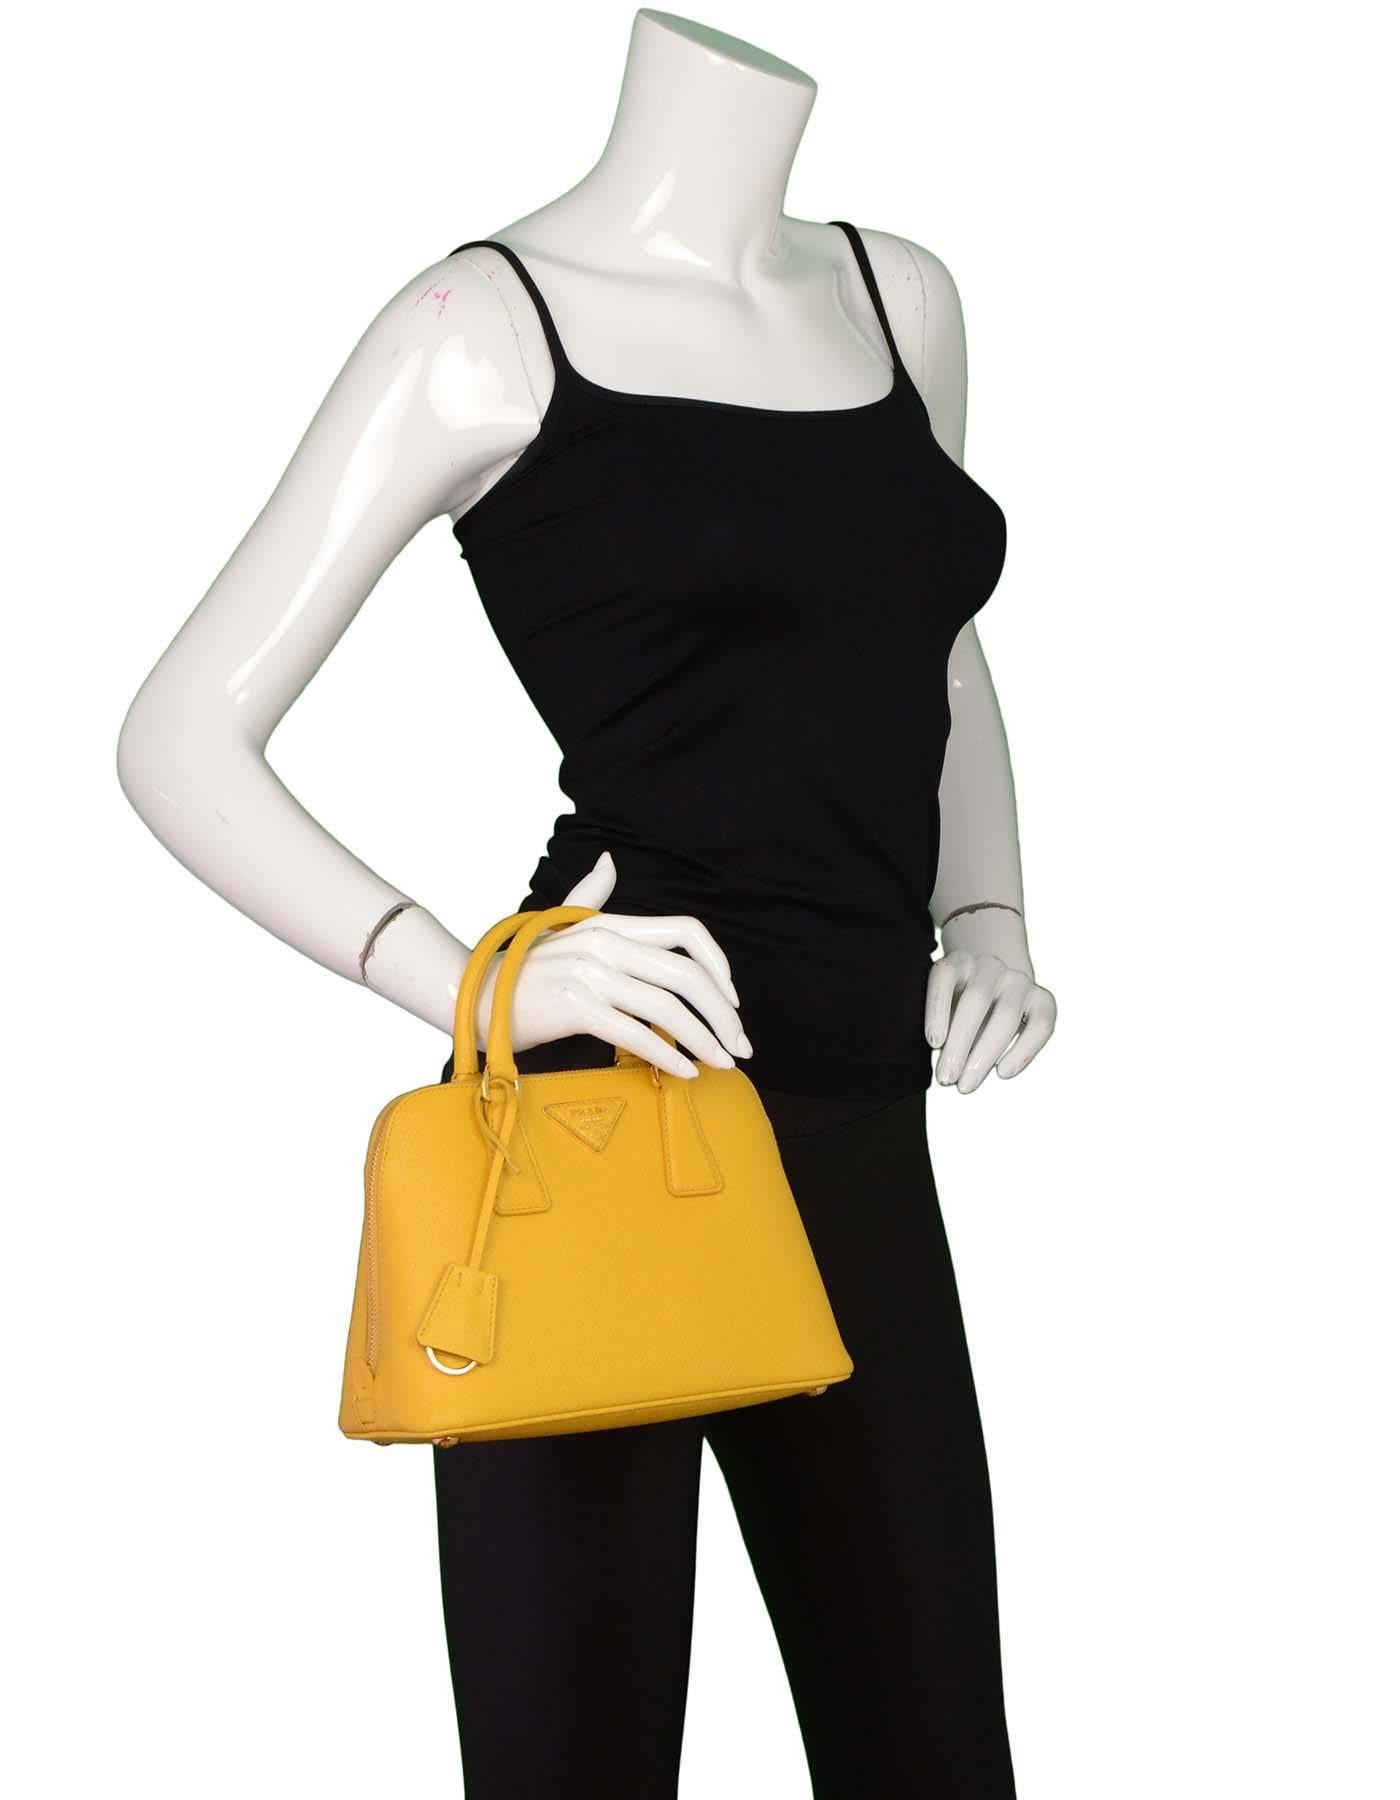 Prada Yellow Mini Promenade Saffiano Bag with GHW
Features optional shoulder strap

Made in: Italy
Color: Yellow
Hardware: Goldtone
Materials: Saffiano leather
Lining: Yellow textile
Closure/opening: Zip top
Exterior Pockets: None
Interior